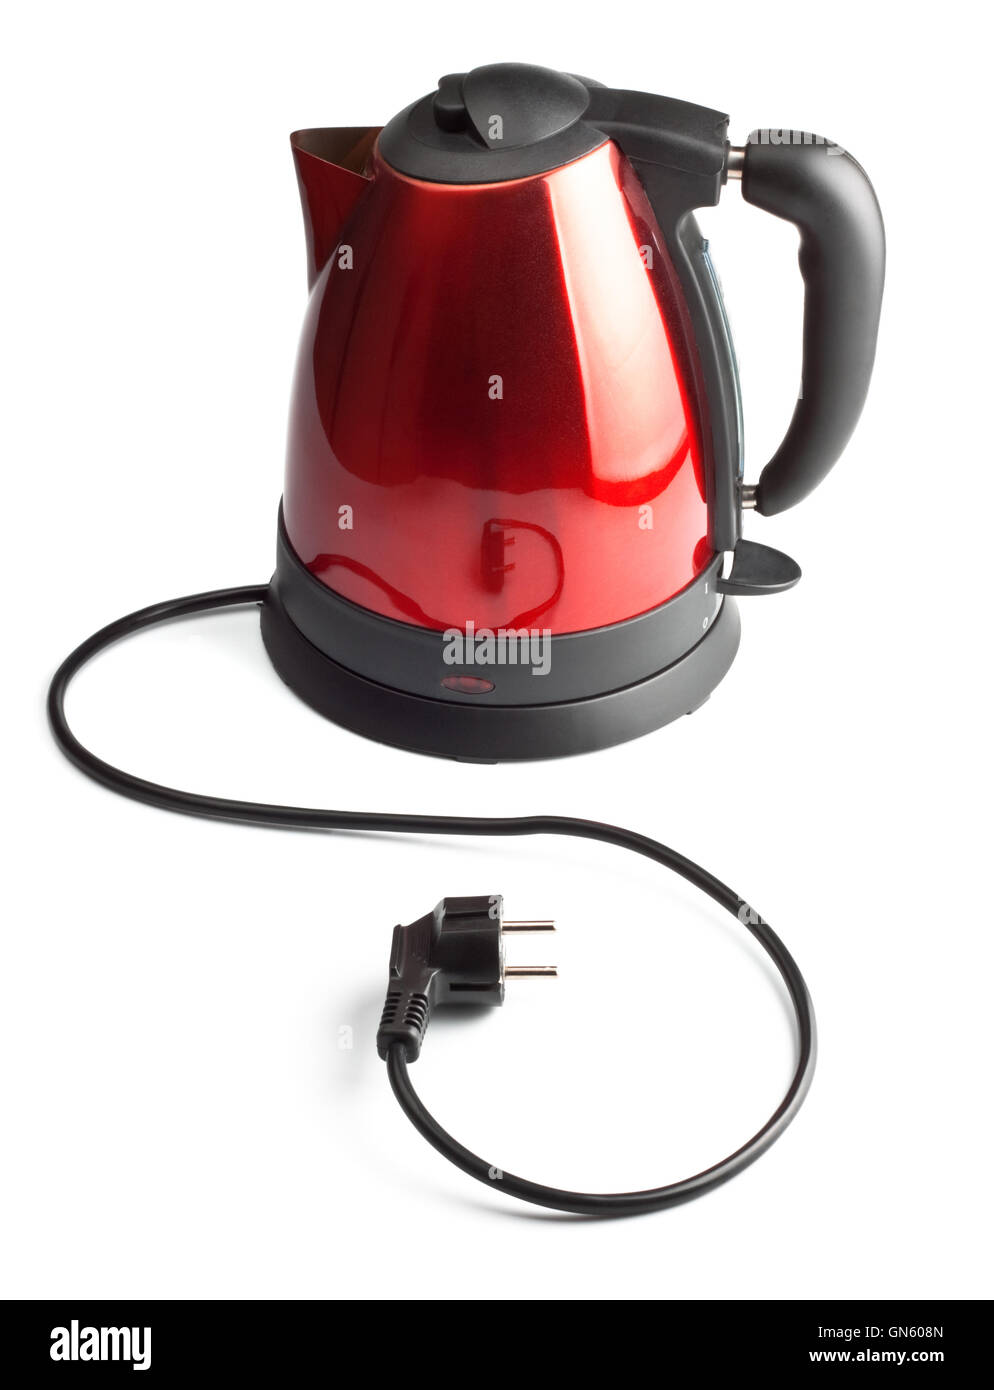 https://c8.alamy.com/comp/GN608N/red-and-black-electrical-tea-kettle-GN608N.jpg